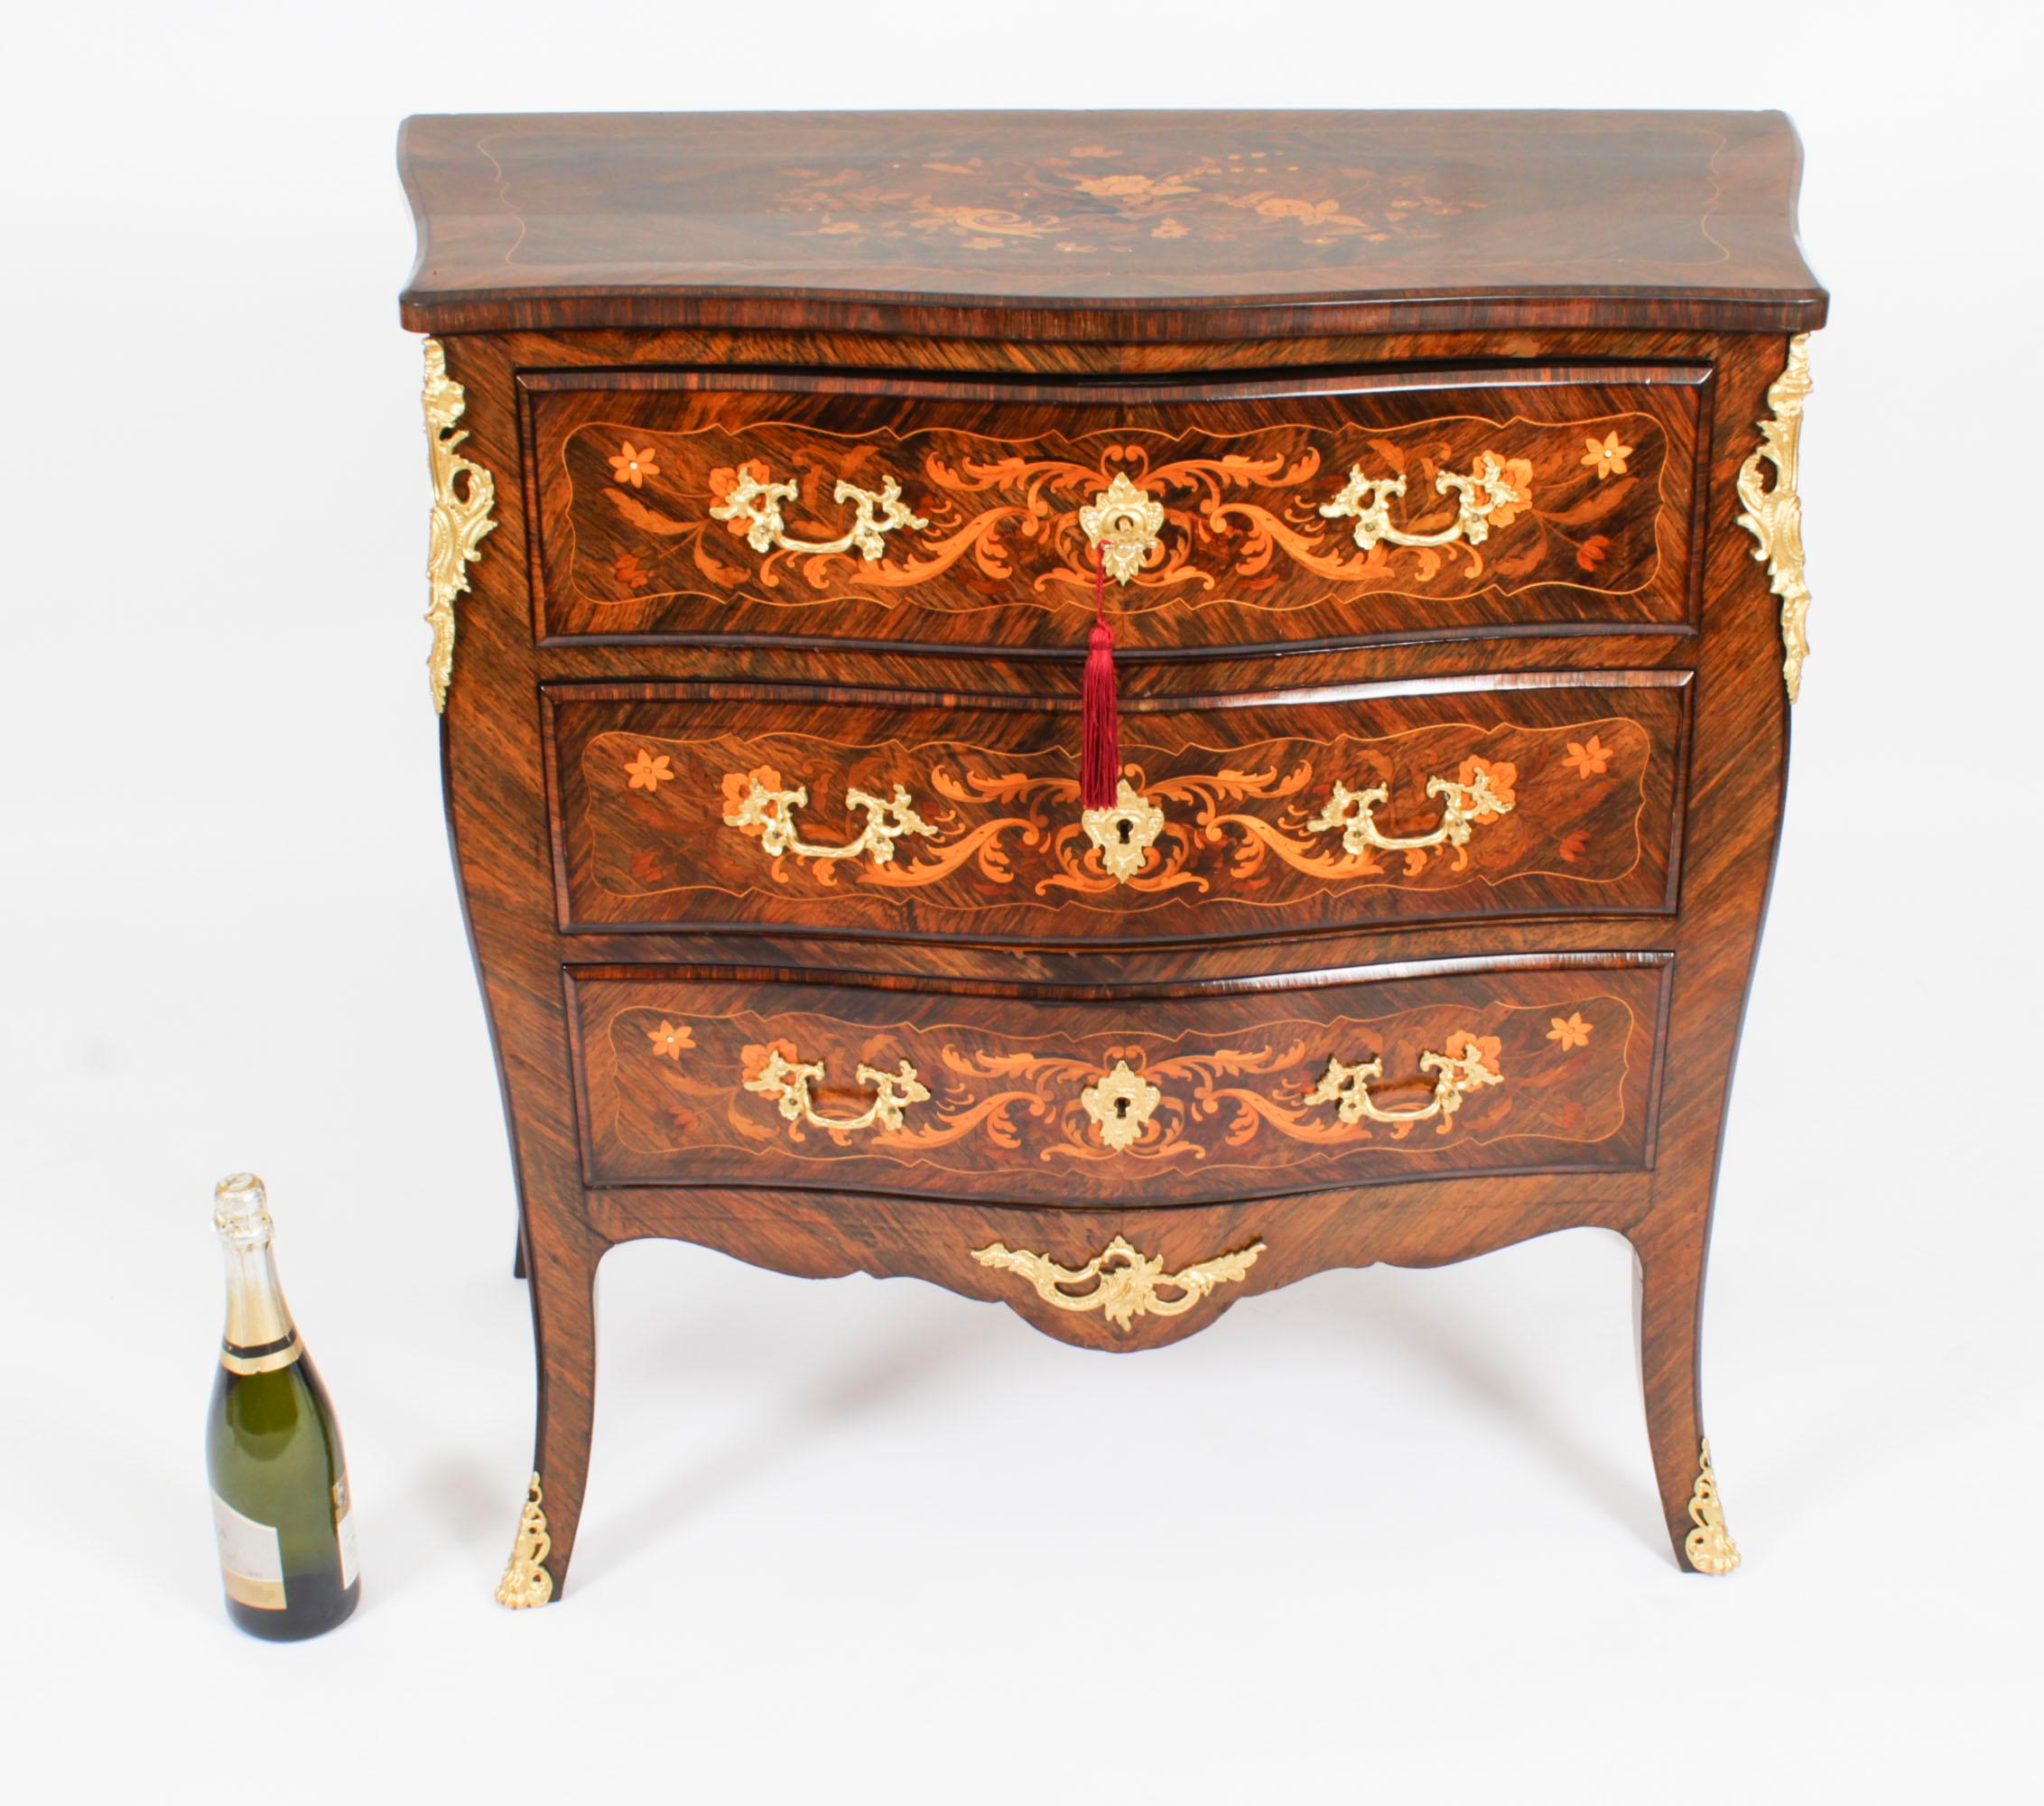 Antique French Louis Revival Marquetry Commode Chest of Drawers 19th Century For Sale 14